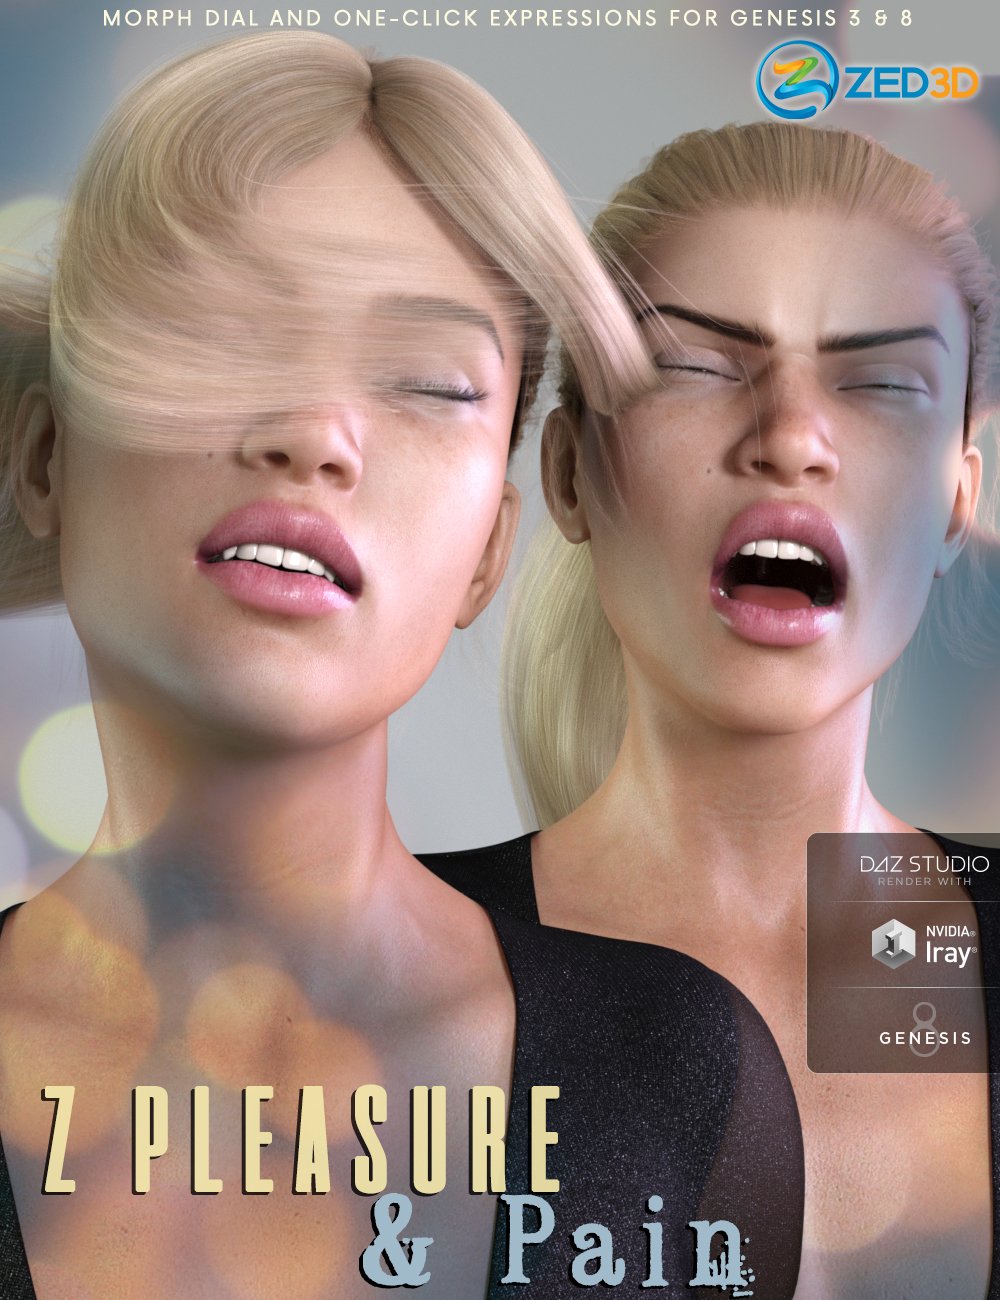 Z Pleasure and Pain - Dialable and One-Click Expressions for Genesis 3 and 8 by: Zeddicuss, 3D Models by Daz 3D